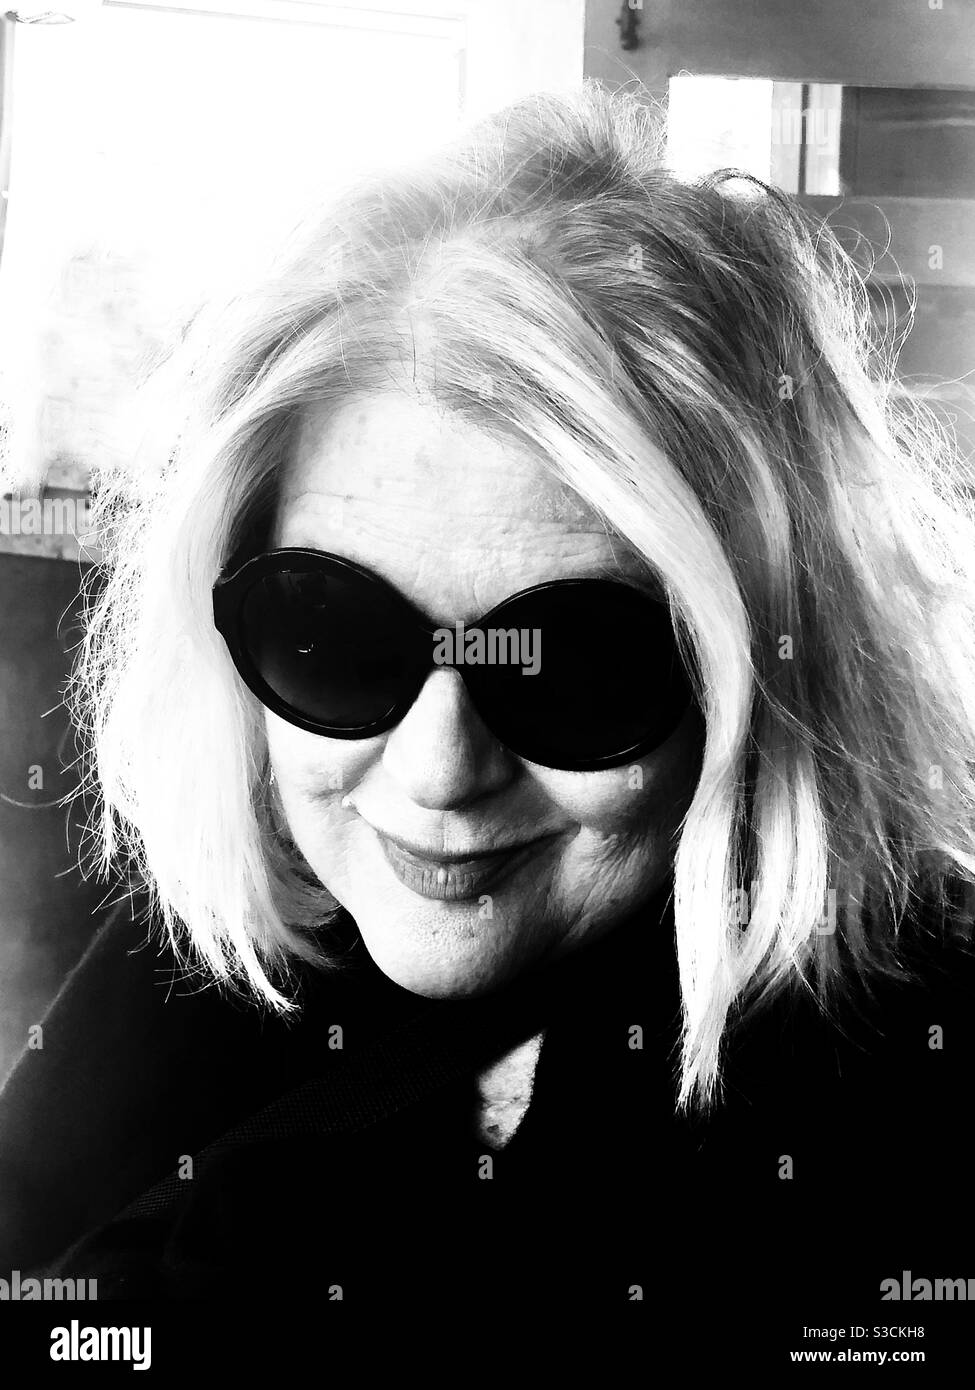 who is the beautiful mysterious blonde woman with an a enigmatic smile hiding behind sunglasses in this vintage looking black and white photo S3CKH8